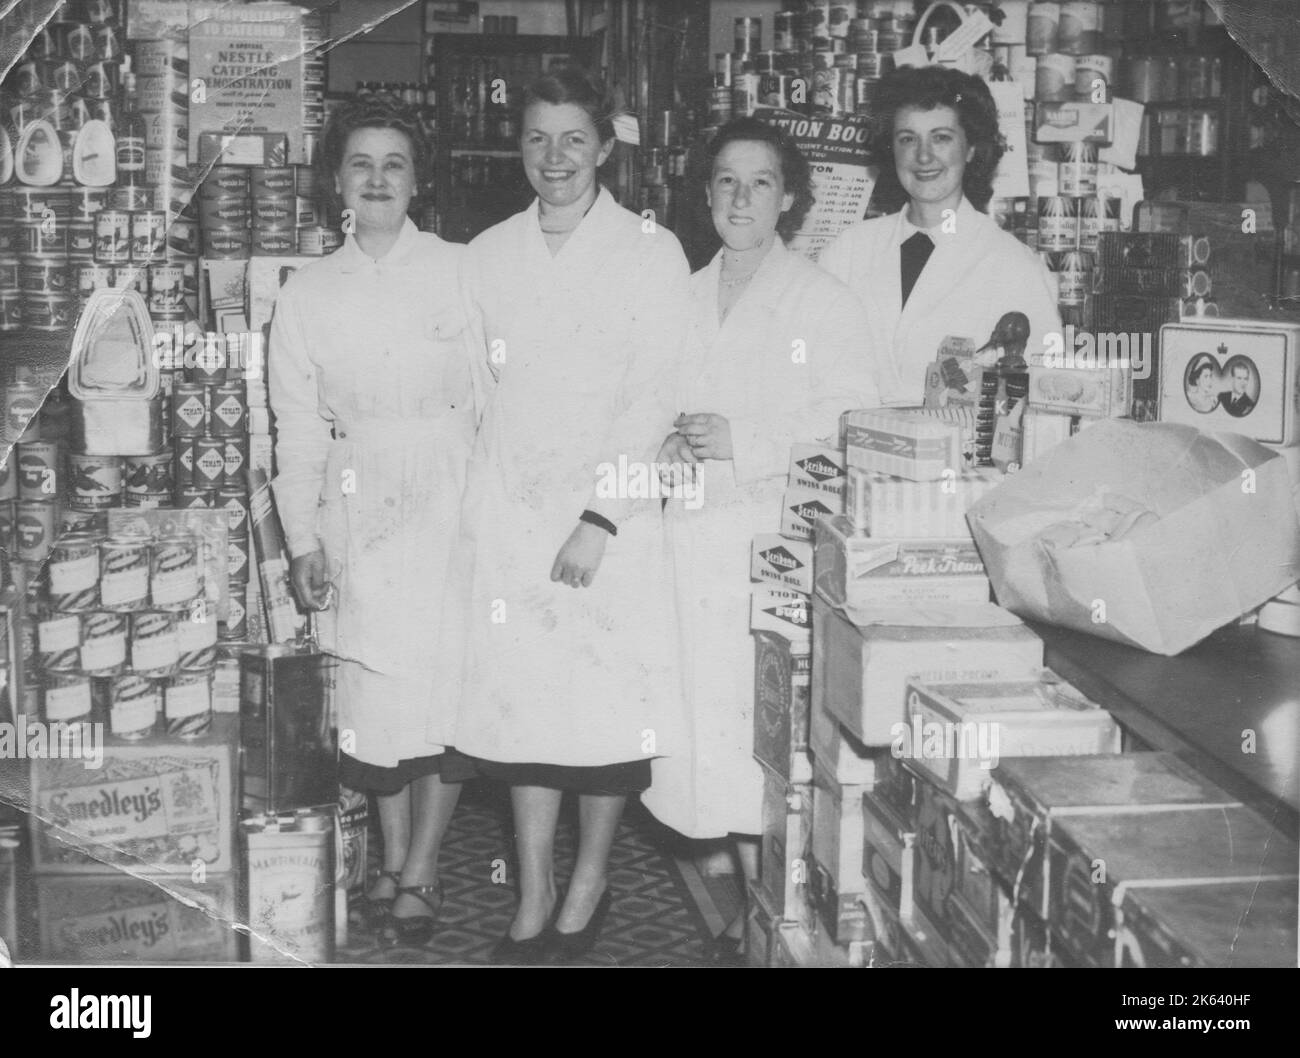 Four shop workers line up for a photograph in a well-stocked grocery store. The rationing sign behind them and the royal tin suggests the photograph dates to around 1952 or 1953 (rationing ended in Britain in 1954). Stock Photo